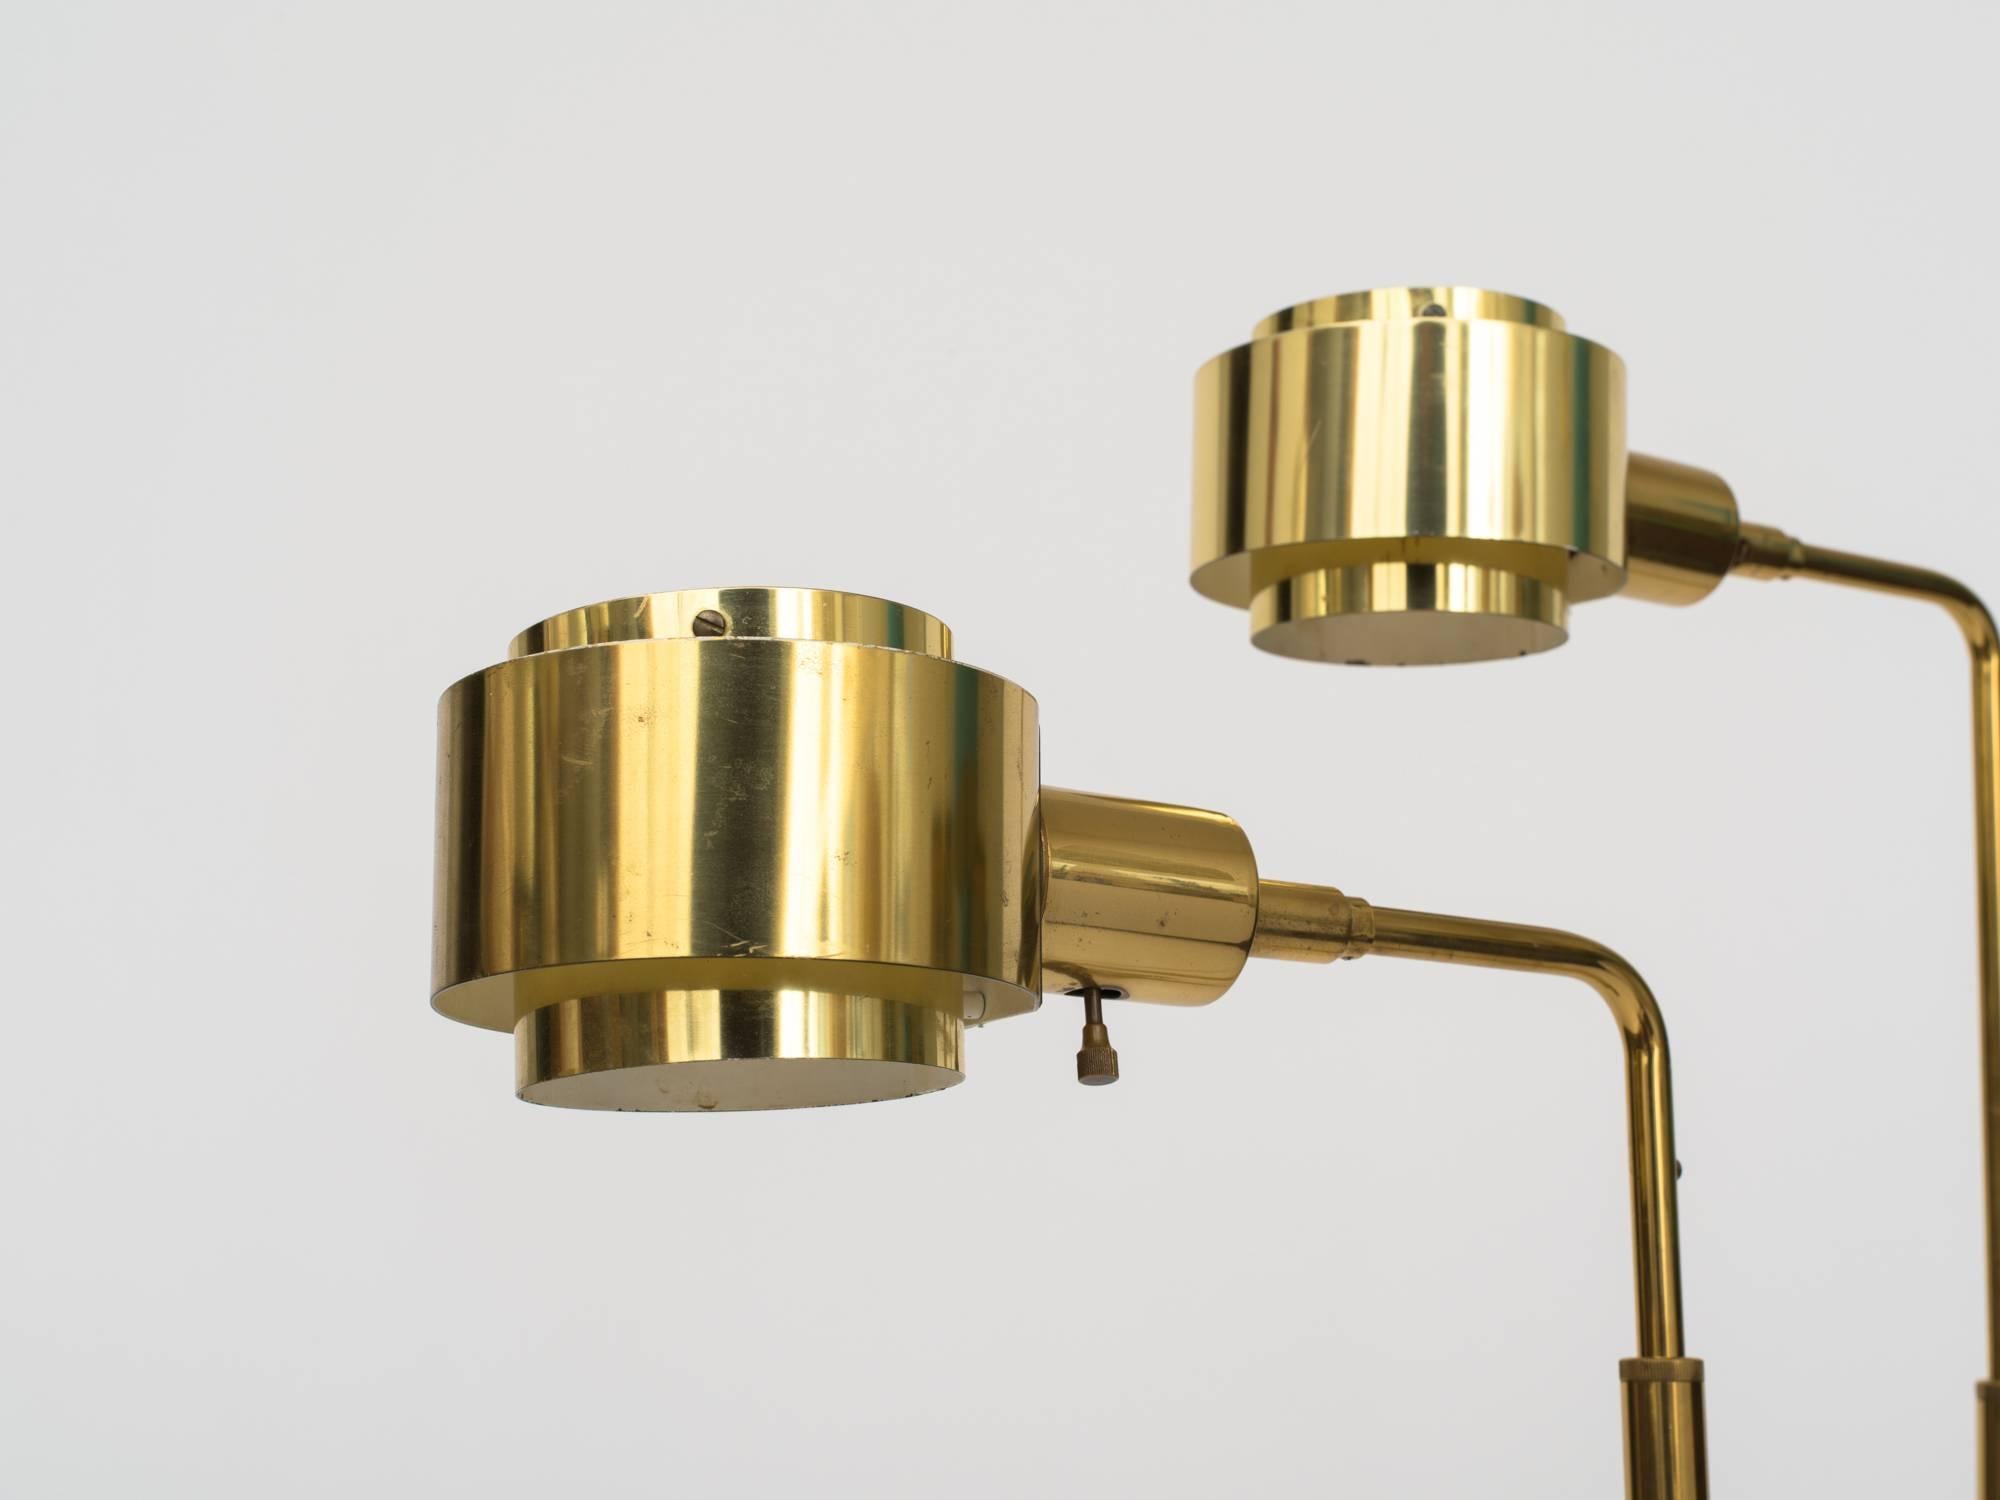 Pair of 1970s brass reading lamps with adjustable height and rectangular bases. Circular shades pivot to direct light. Stamped, Koch & Lowy.